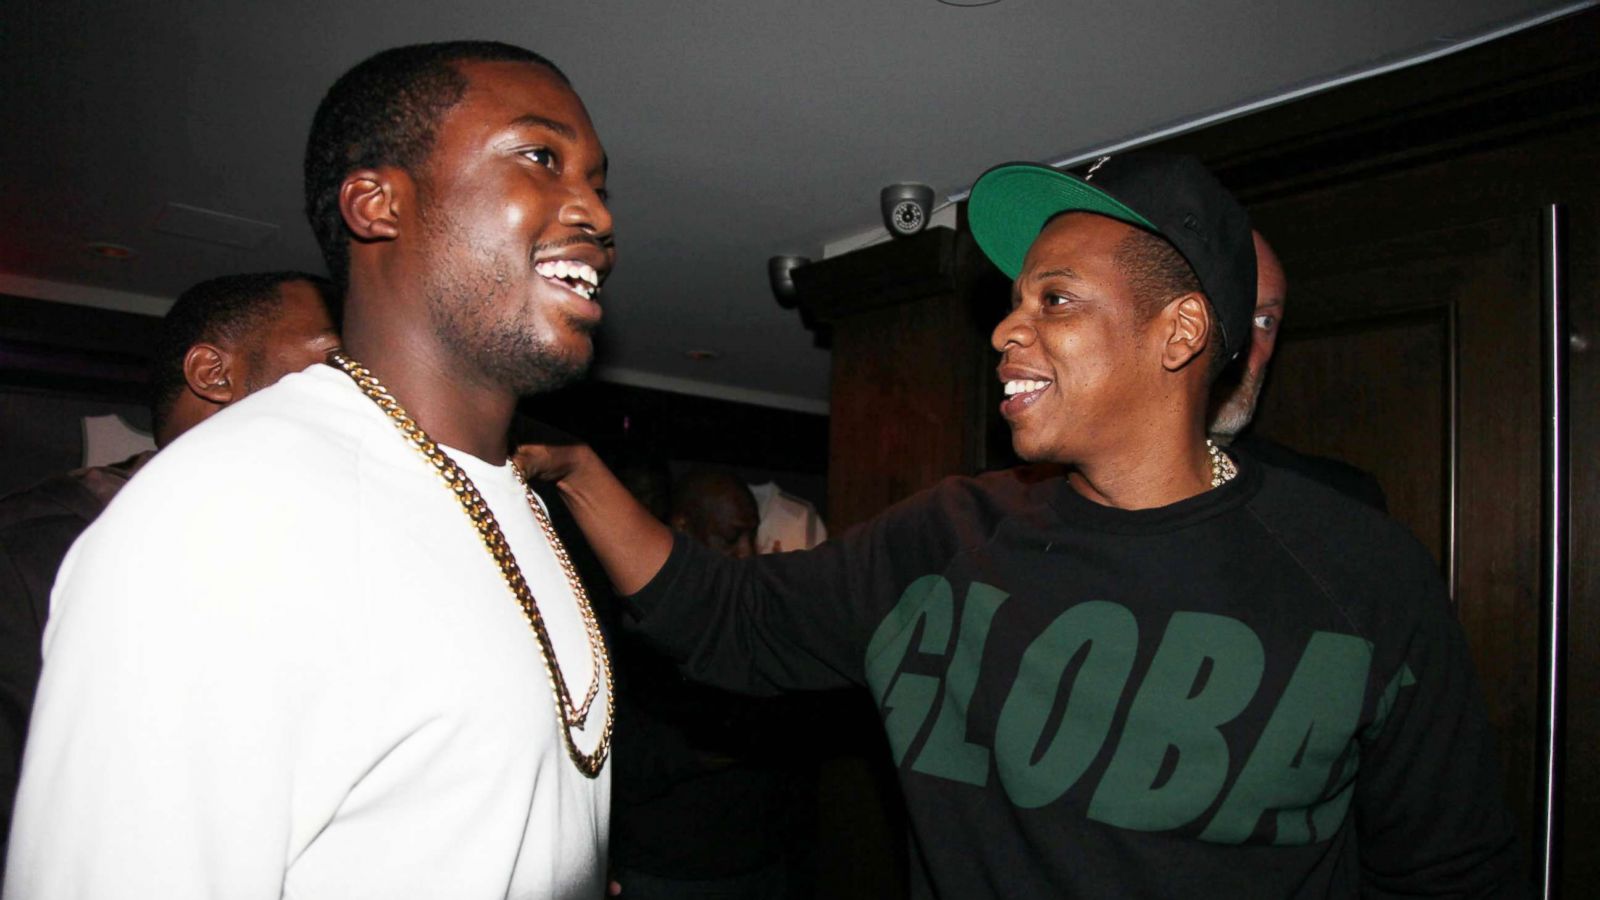 Meek Mill and Jay-Z are Sending 100,000 Surgical Masks to Jails